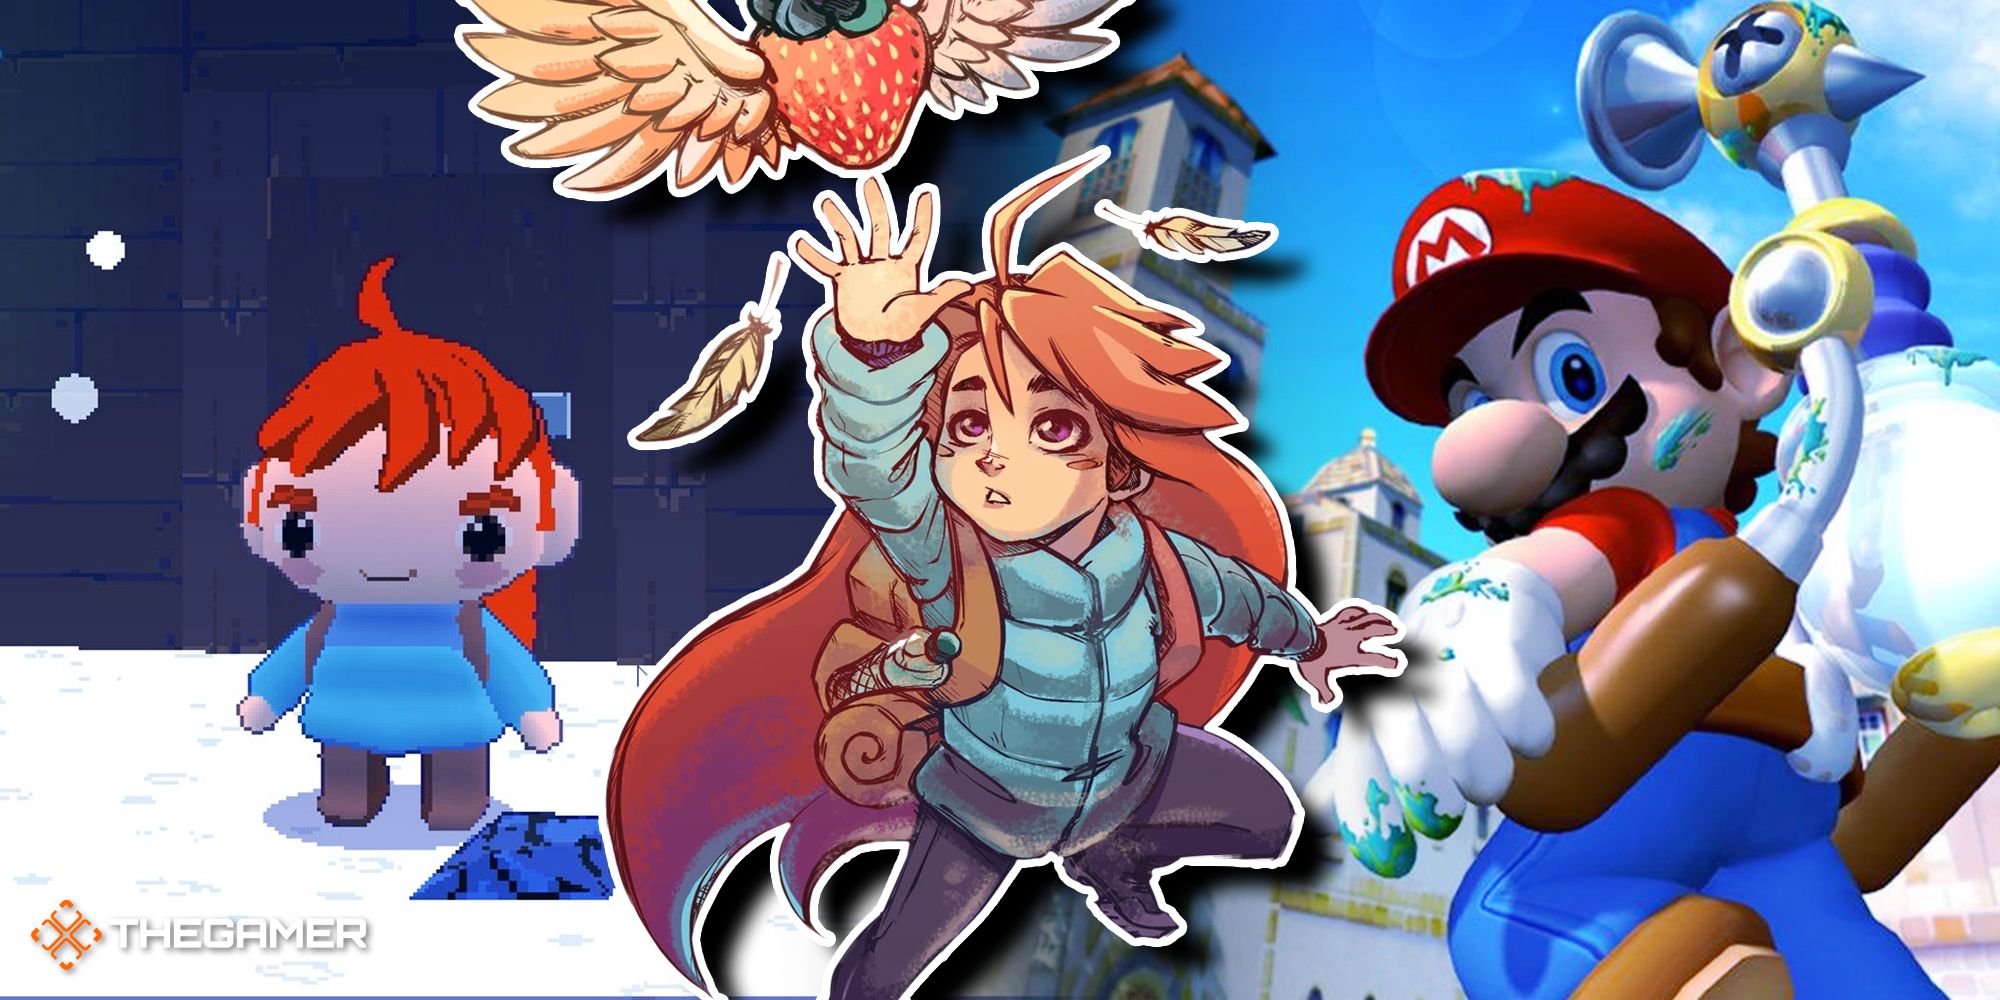 Split image with Madeline from Celeste 64 on the left, Mario from Super Mario Sunshine on the right, and Madeline reaching for a strawberry in the middle.